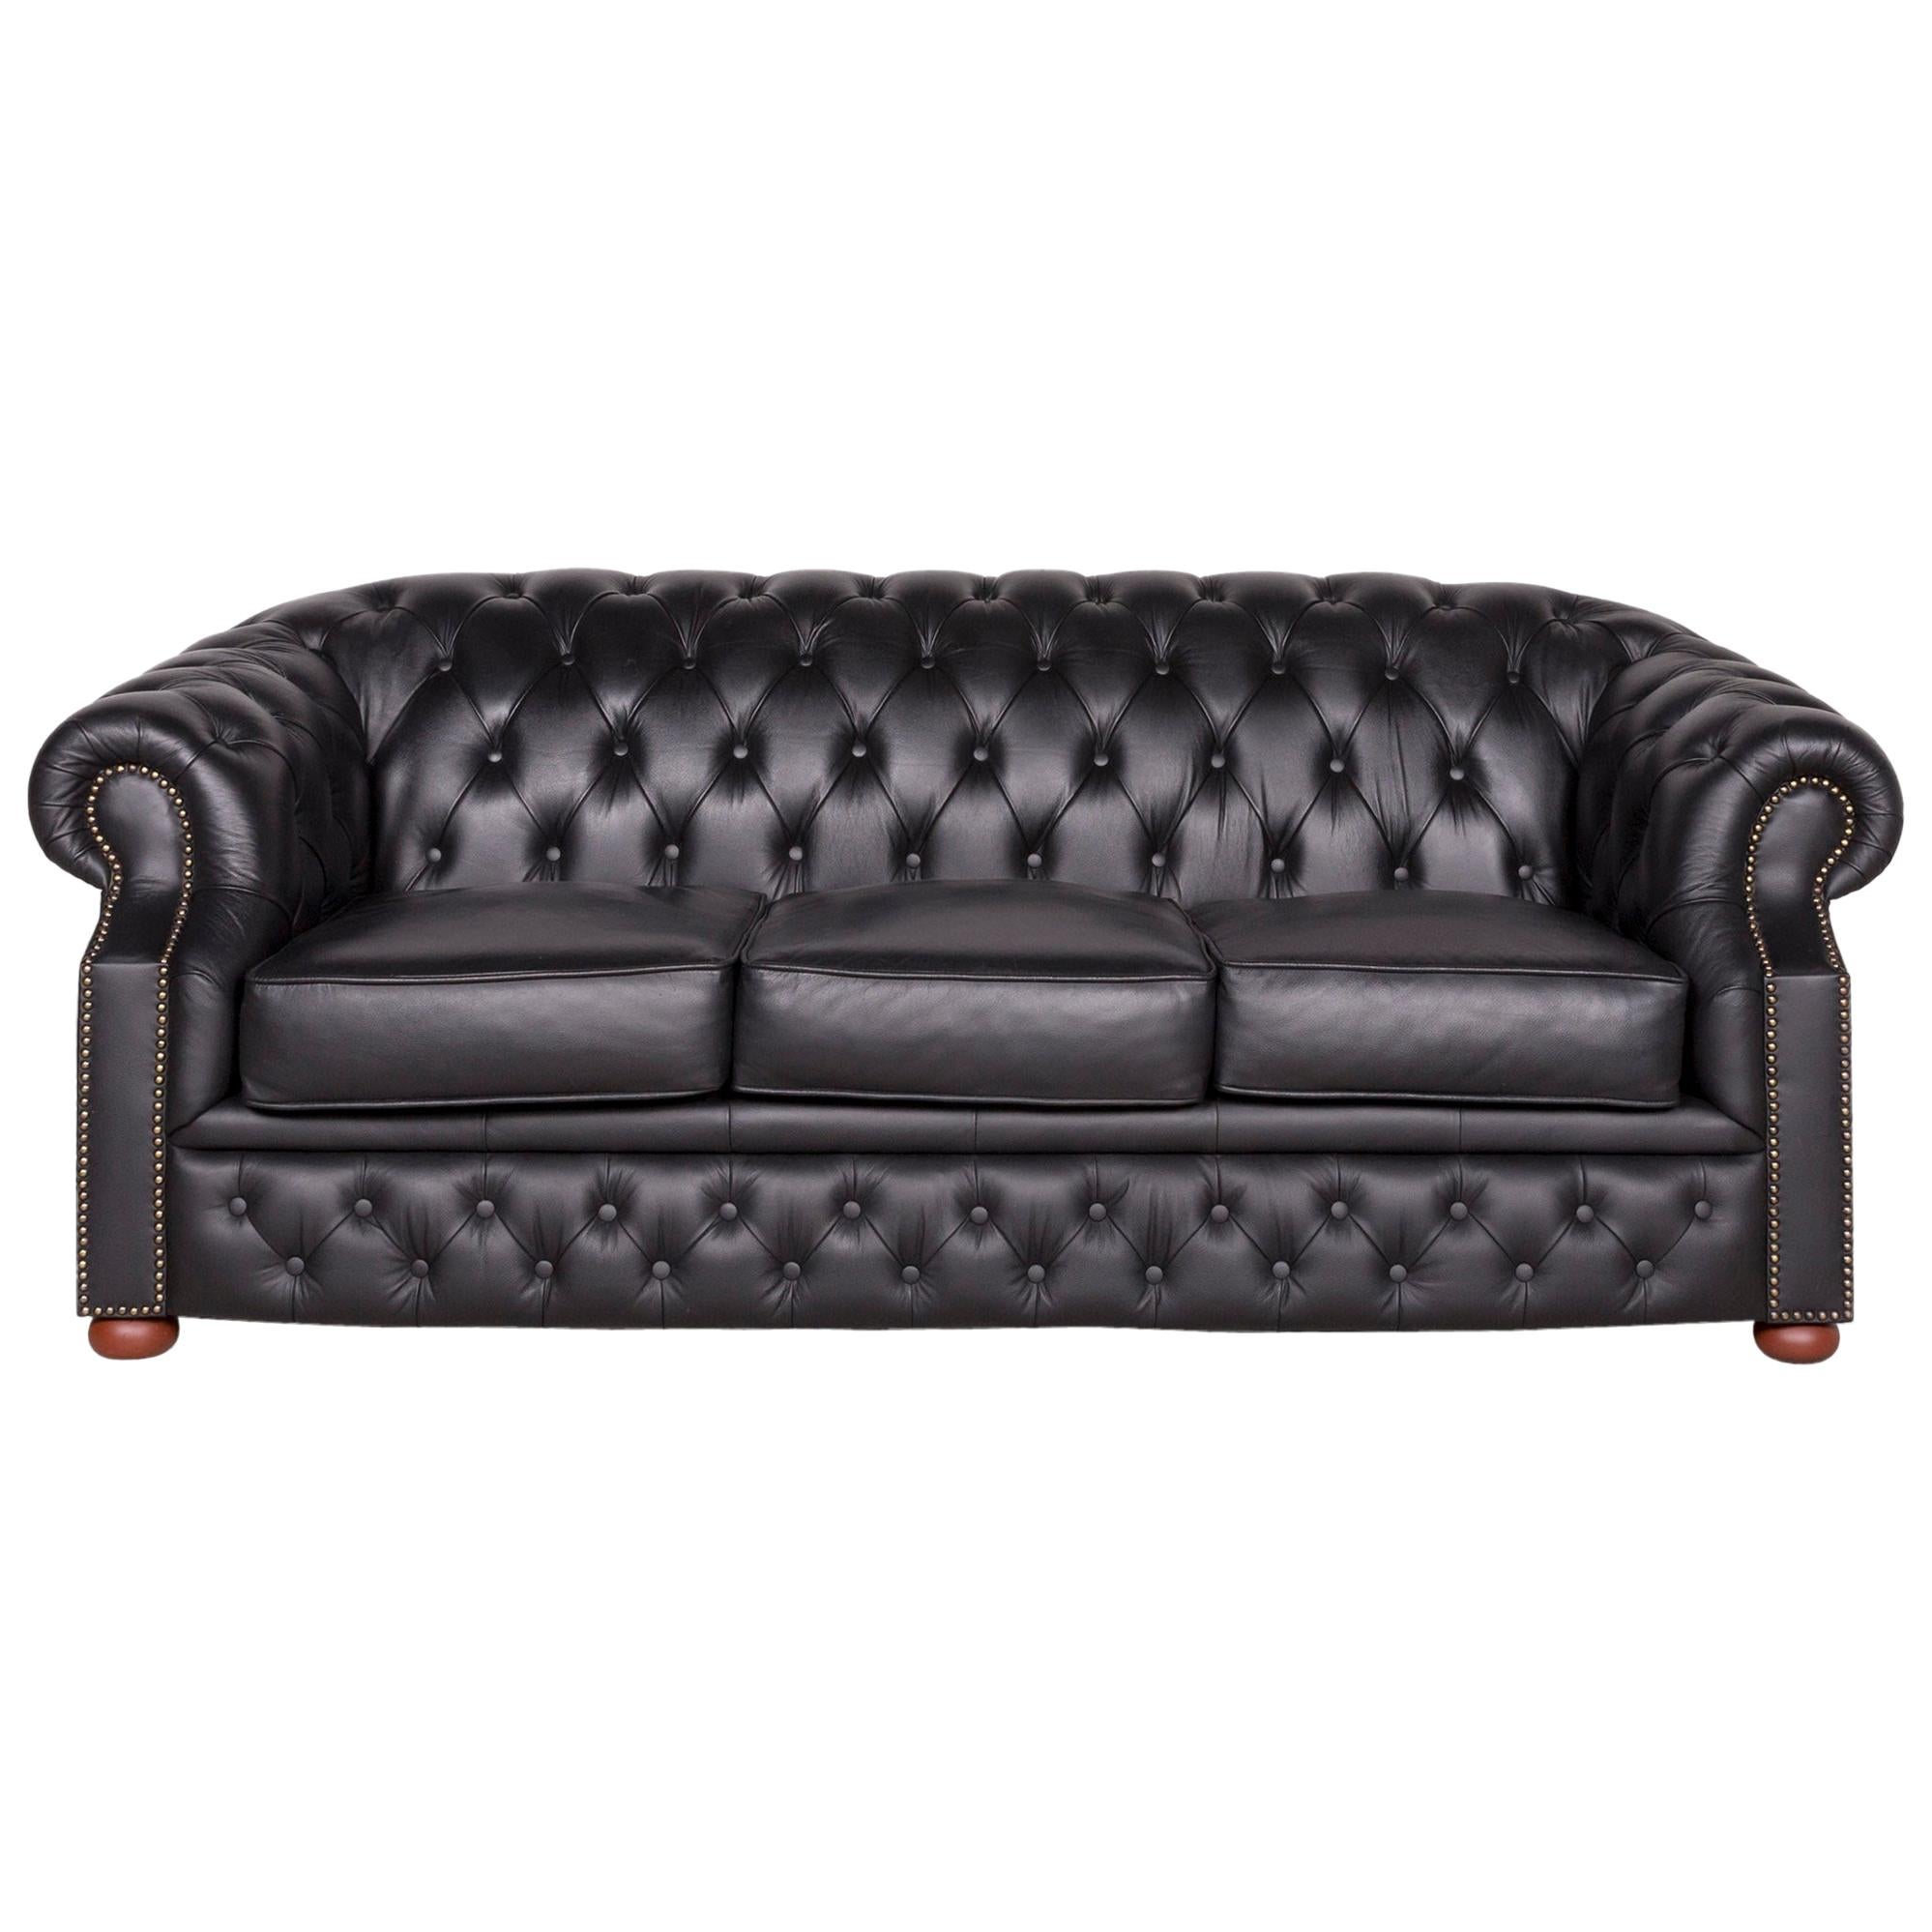 Chesterfield Designer Leather Sofa Black Three-Seater Real Leather Couch Retro For Sale